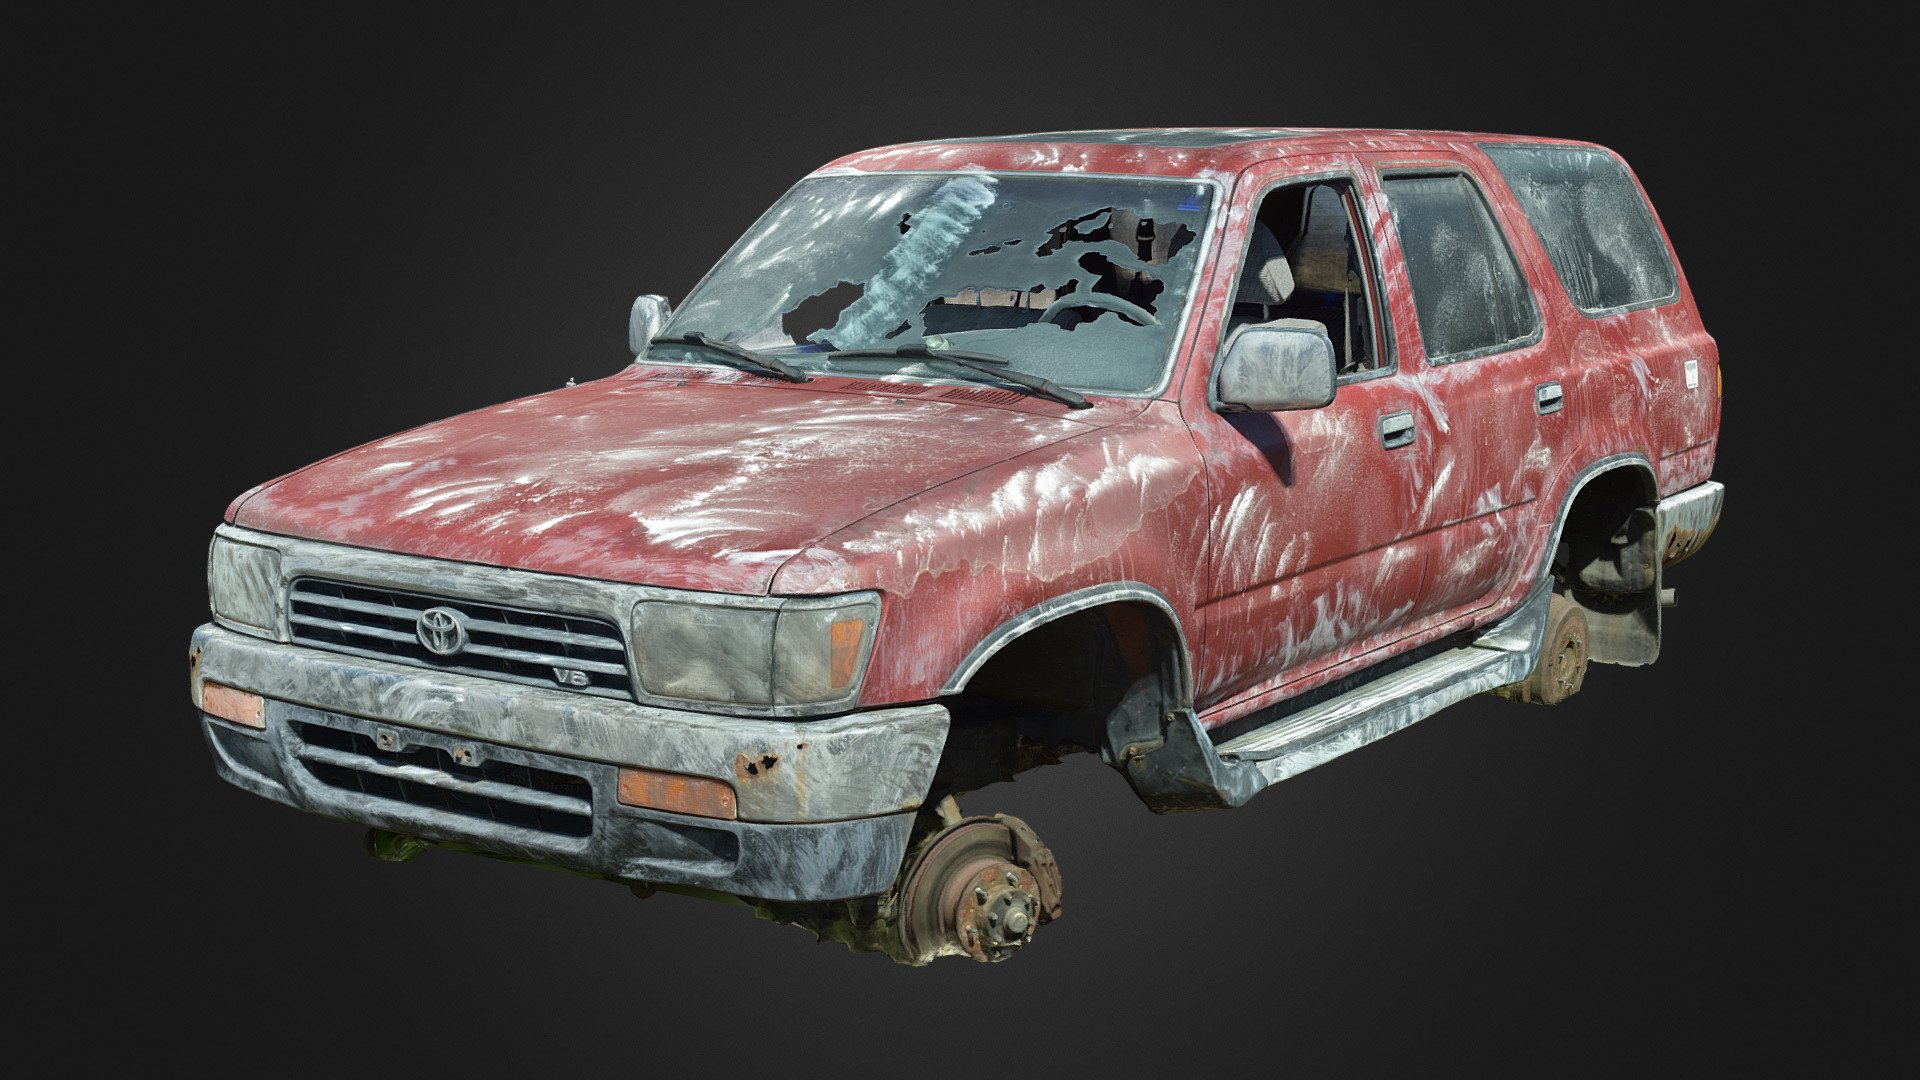 High-accuracy photoscan Intended for use as modeling reference.

Photos taken with my Nikon D3400 and polarizing filter

Created in RealityCapture from 3895 images - 1992-1995 4Runner [Scan] - 3D model by Rush_Freak 3d model